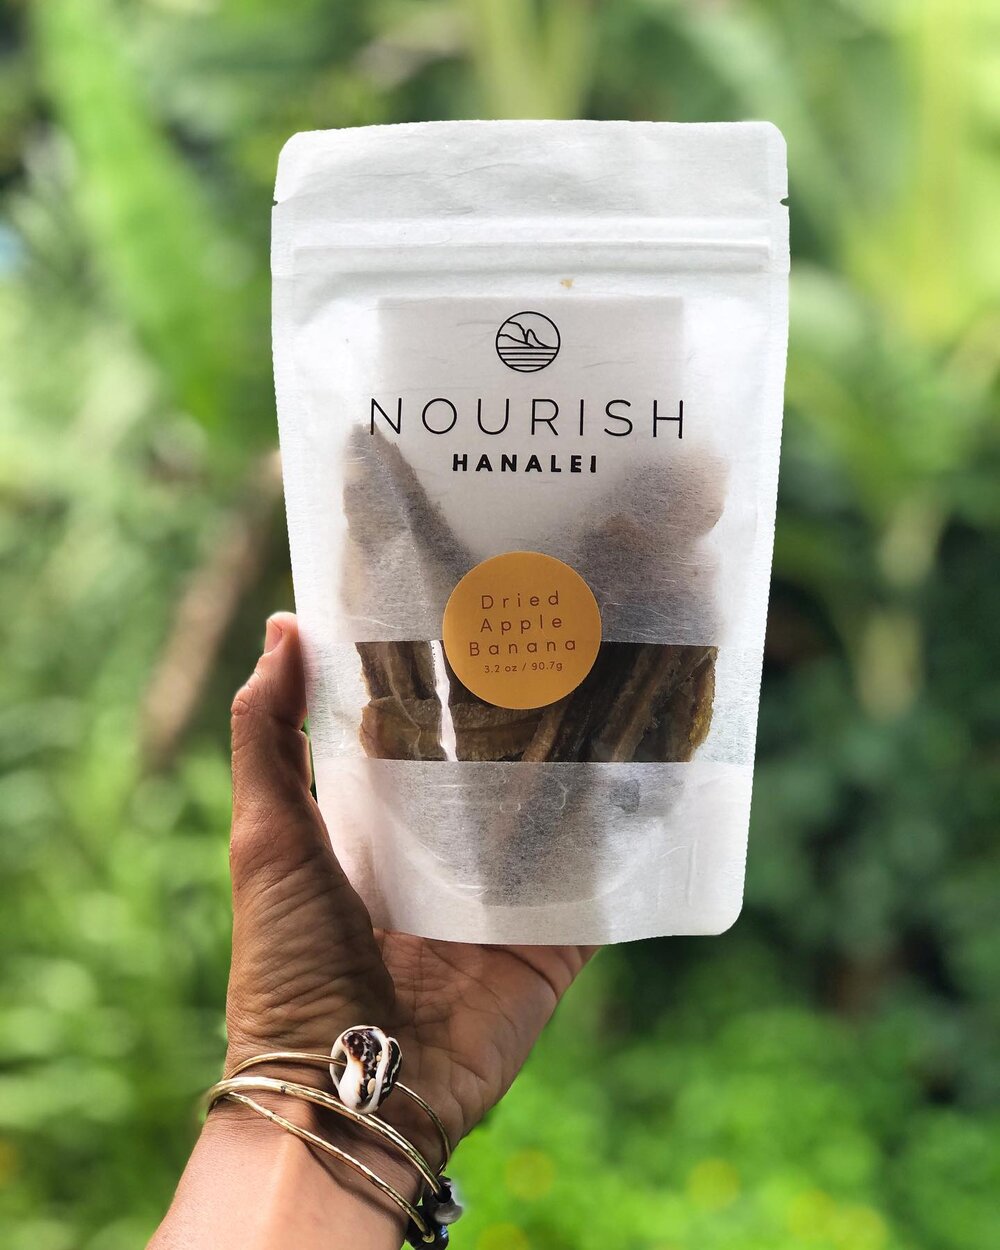 🍌Nourish Hanalei dried apple-bananas 🍌 favorite snack for hiking, beach hangs and camping ⛺️ energizing, nutritious, keeps well &amp; great to share with friends 🌻👫